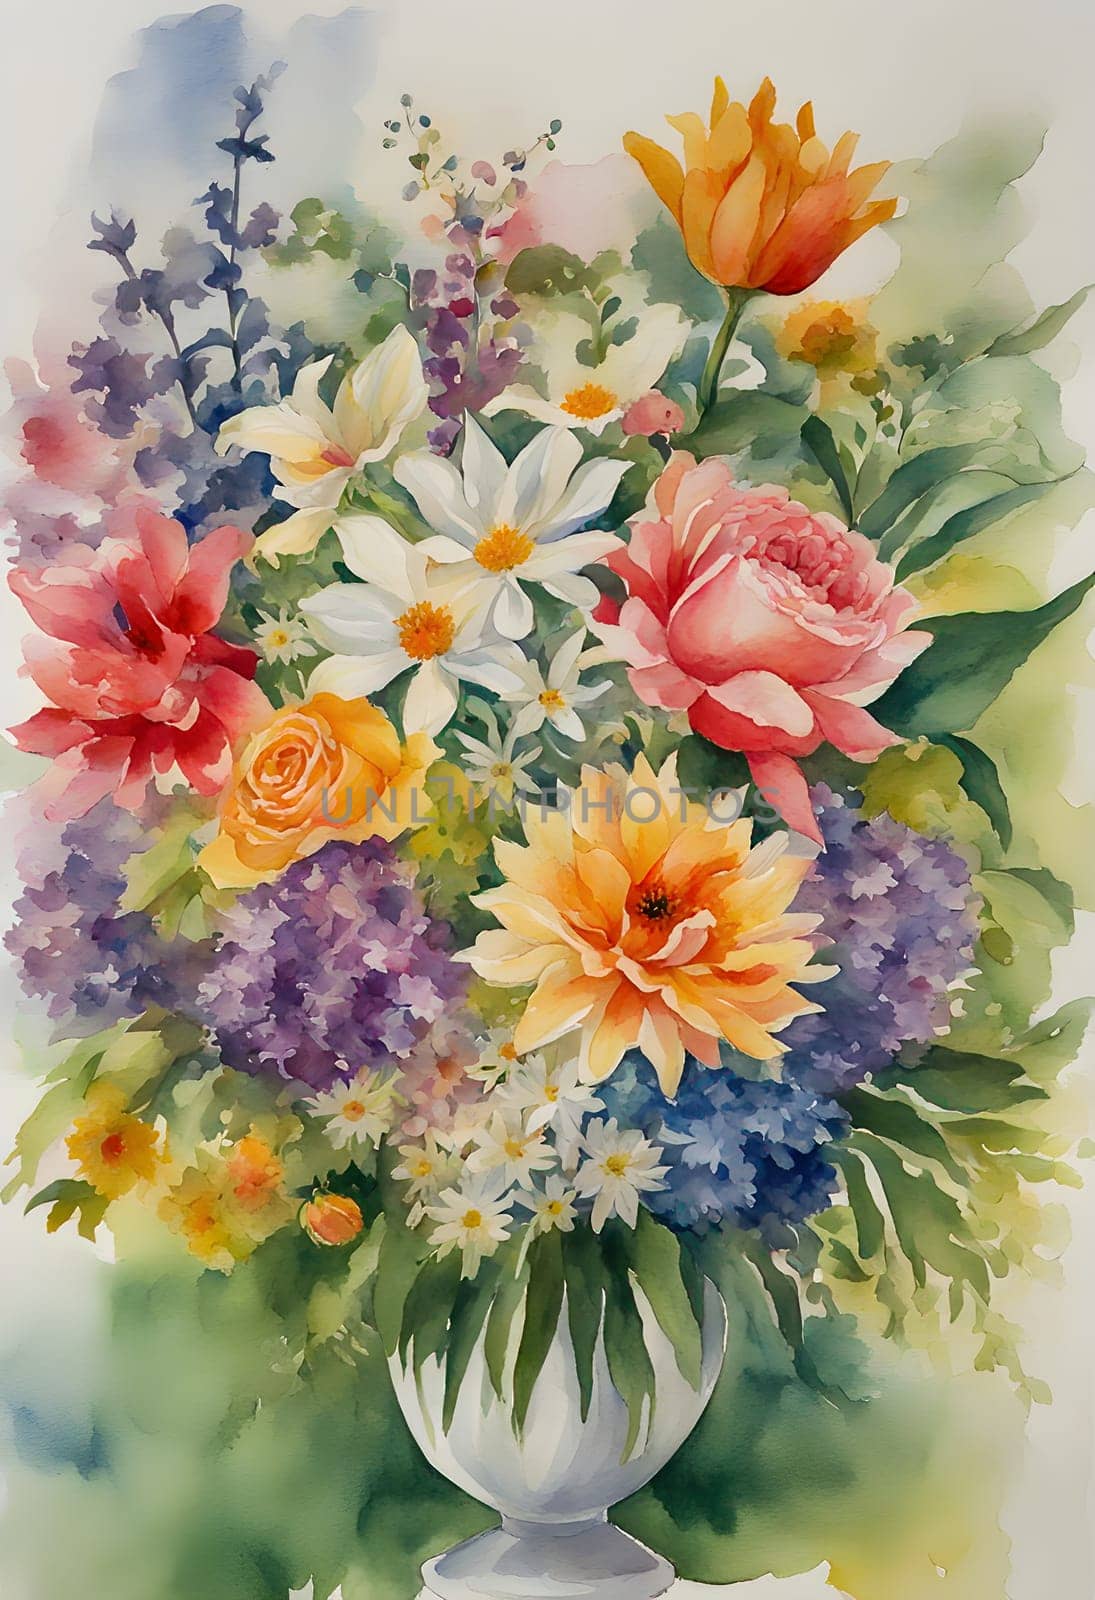 The image shows a watercolor painting of a bouquet of flowers on a white background. The bouquet is composed of different types of flowers, including roses, lilies, tulips and chrysanthemums. The flowers are painted in bright colors and are surrounded by green leaves. Generate AI